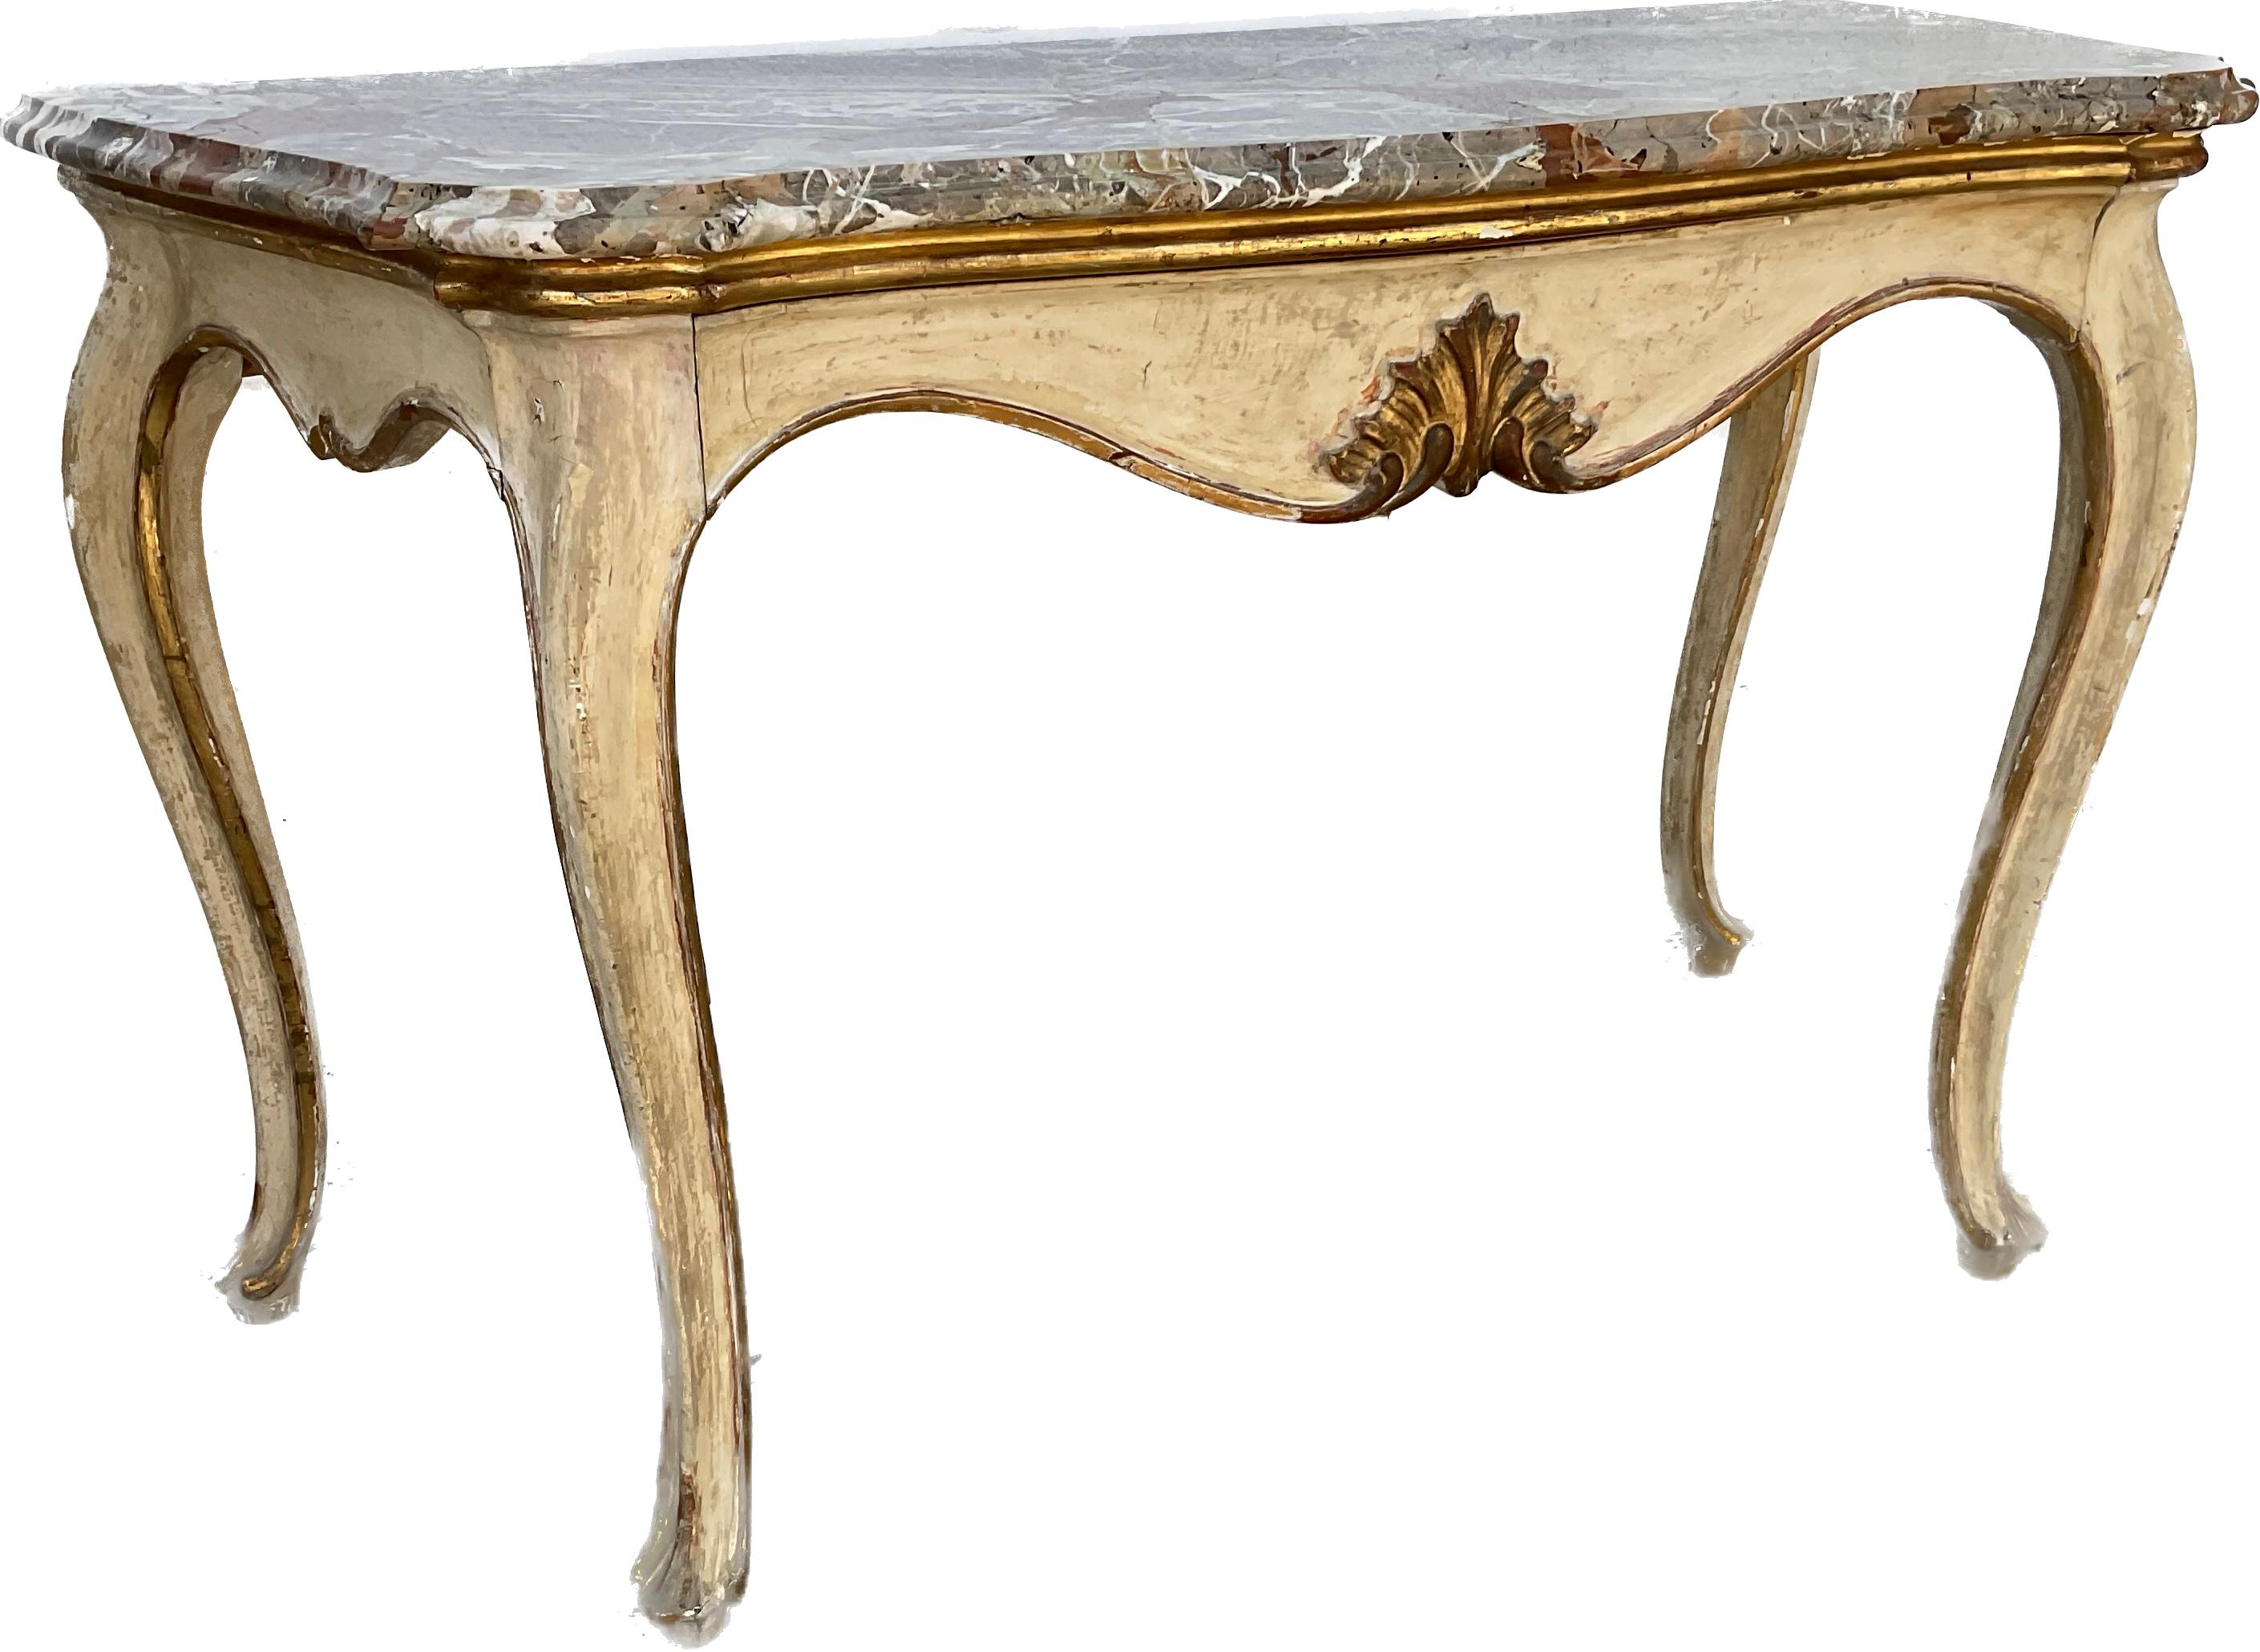 Pair of 19th Century Italian Painted and Gilt Marble-Top Console Tables For Sale 7